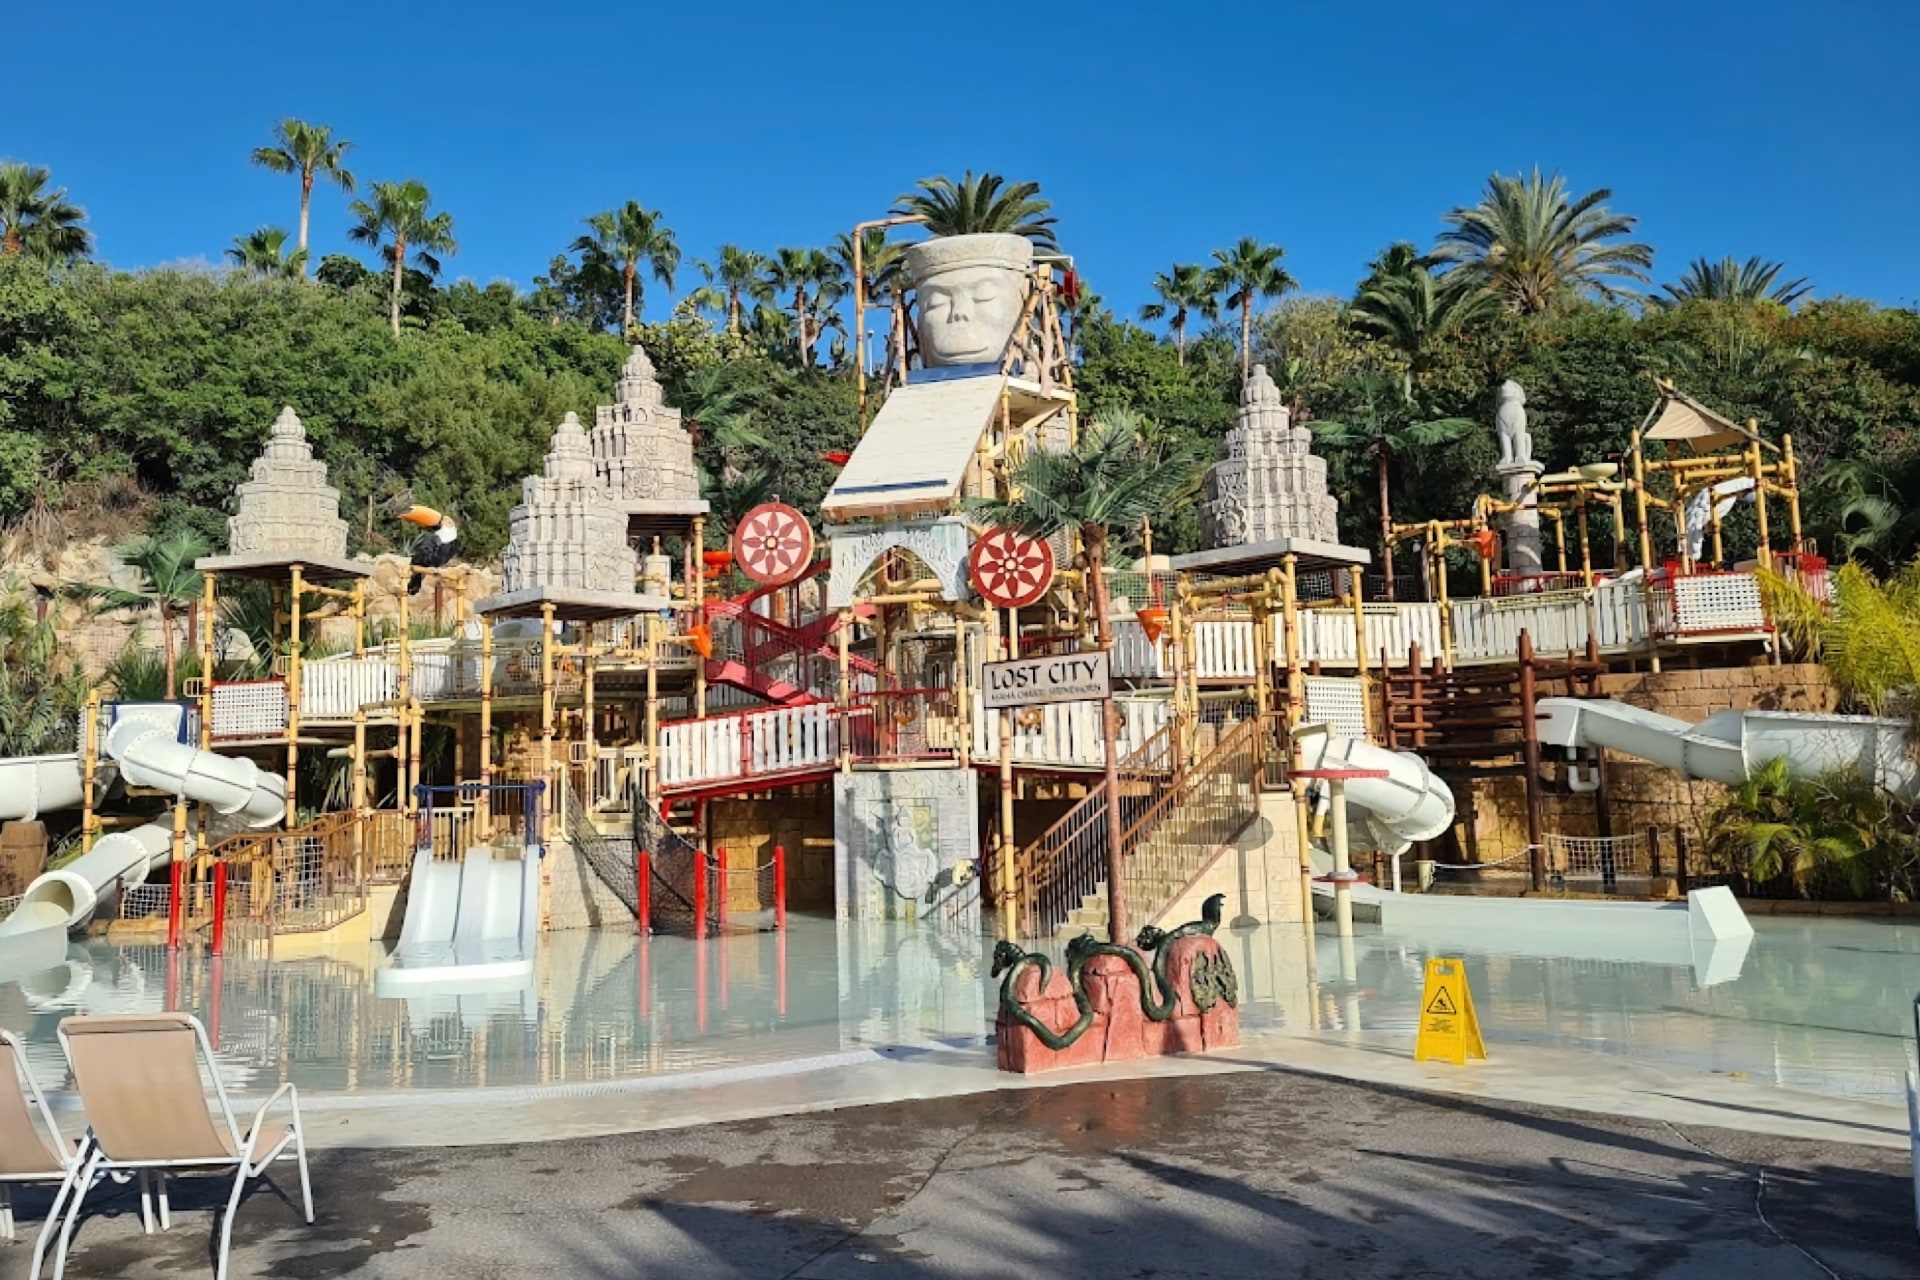 Kids enjoying at the Lost City dedicated play area in Siam Park, Tenerife